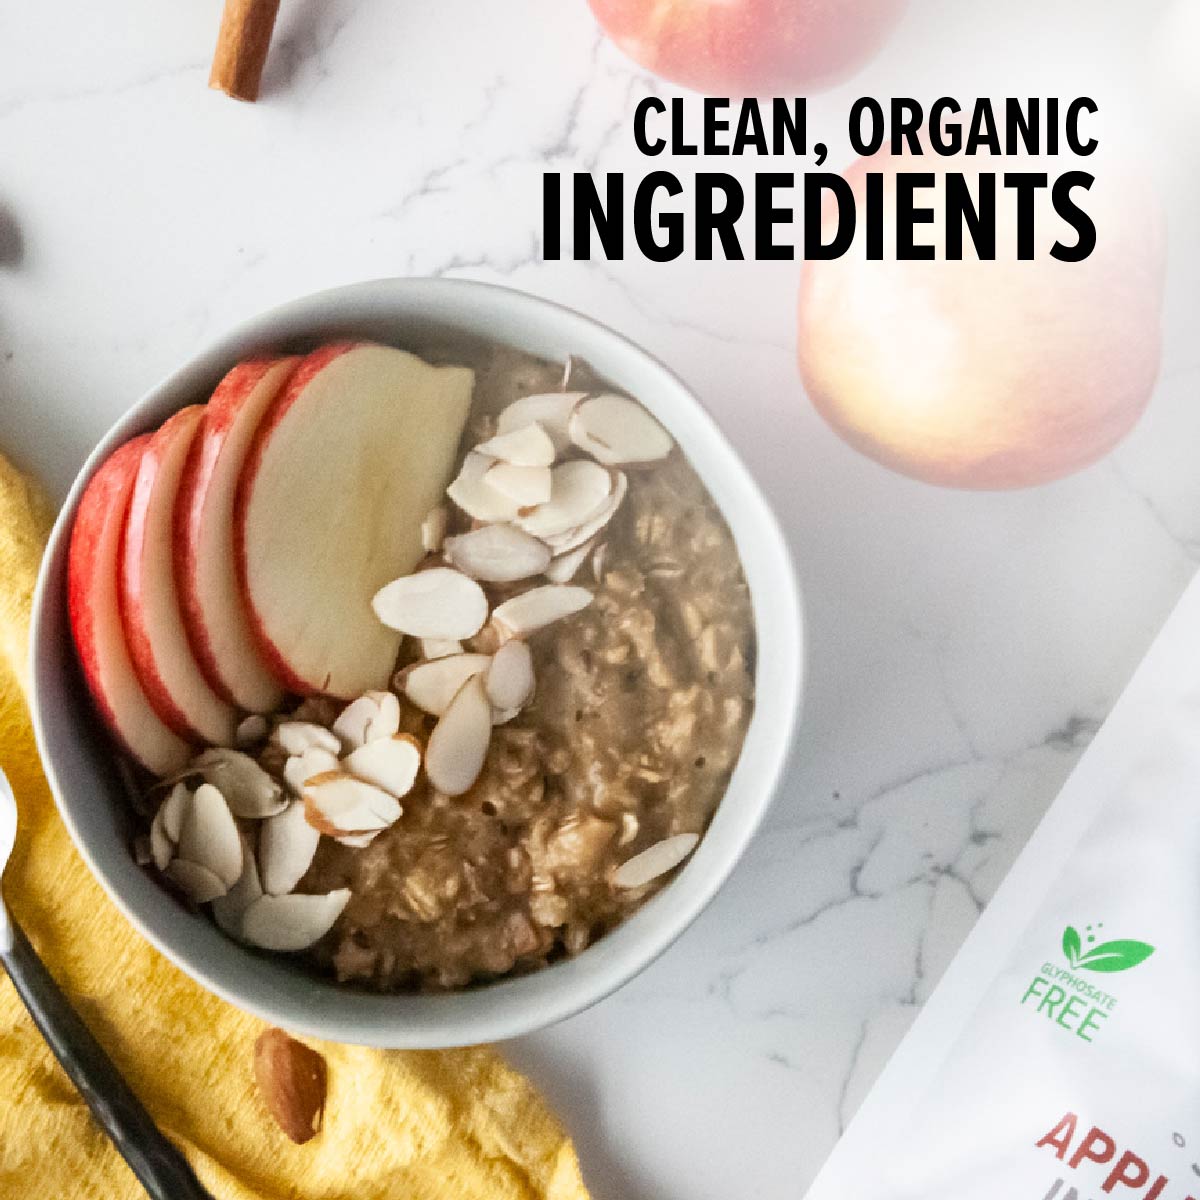 Sprouted Apple Cinnamon Organic Instant Oatmeal